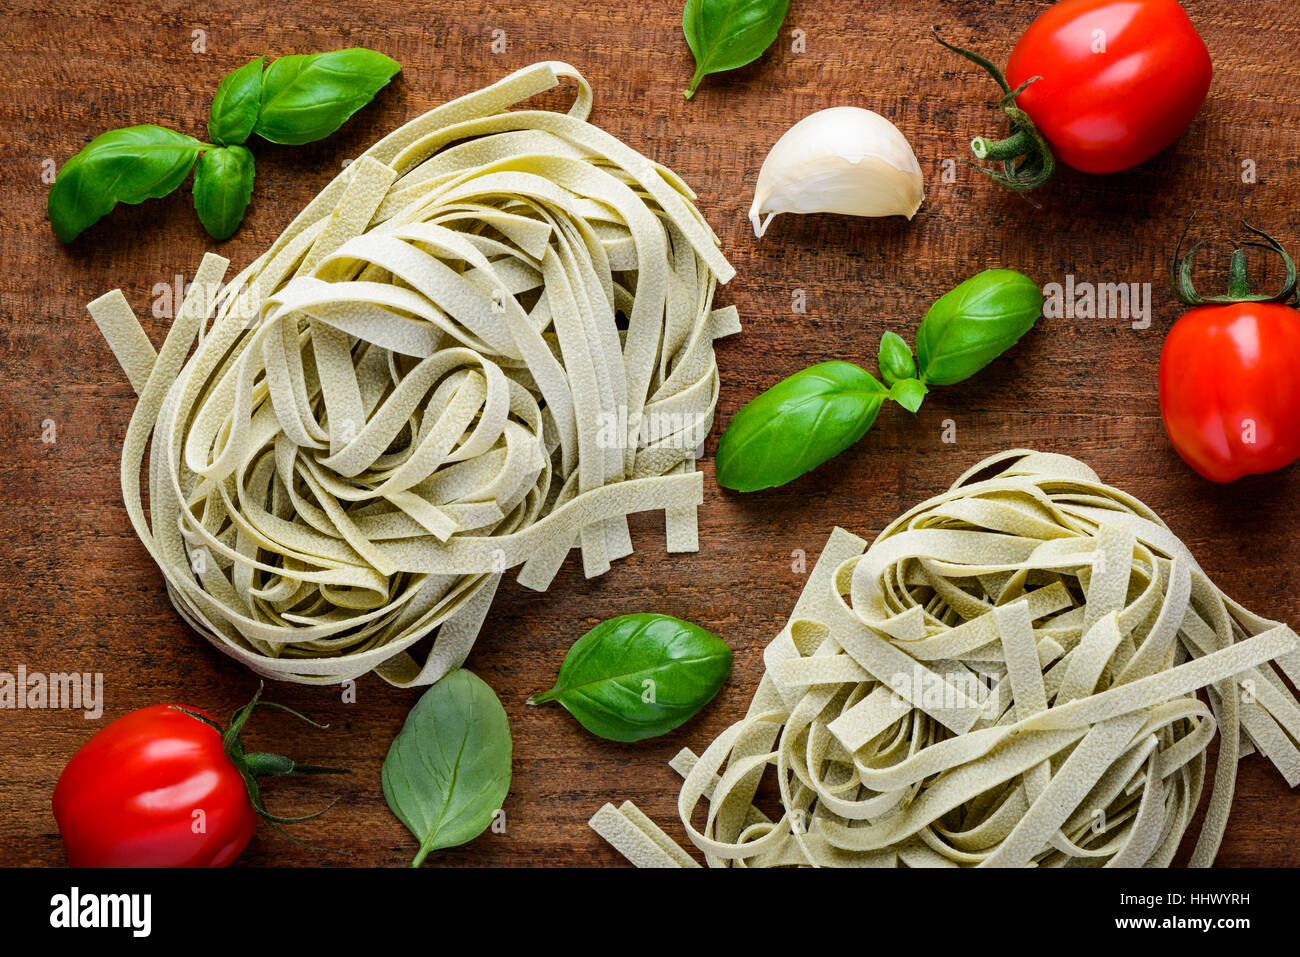 Green Tagliatelle tagliolini fettuccine with basil and tomato cooking ingredients. Stock Photo